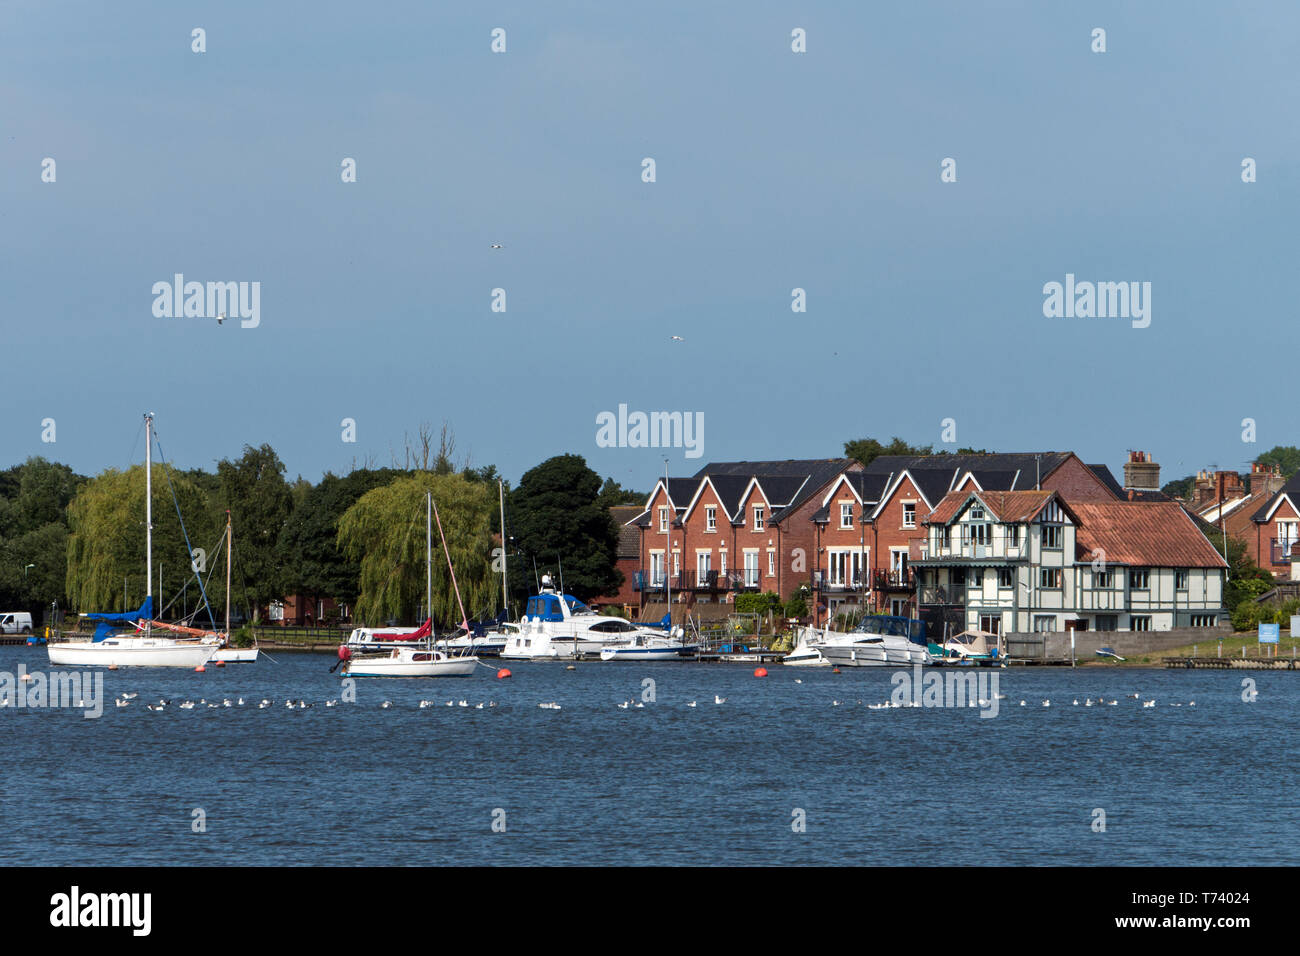 Oulton Broad, the southern gateway to the Broads National Park, Lowestoft, Suffolk, England, UK, Stock Photo